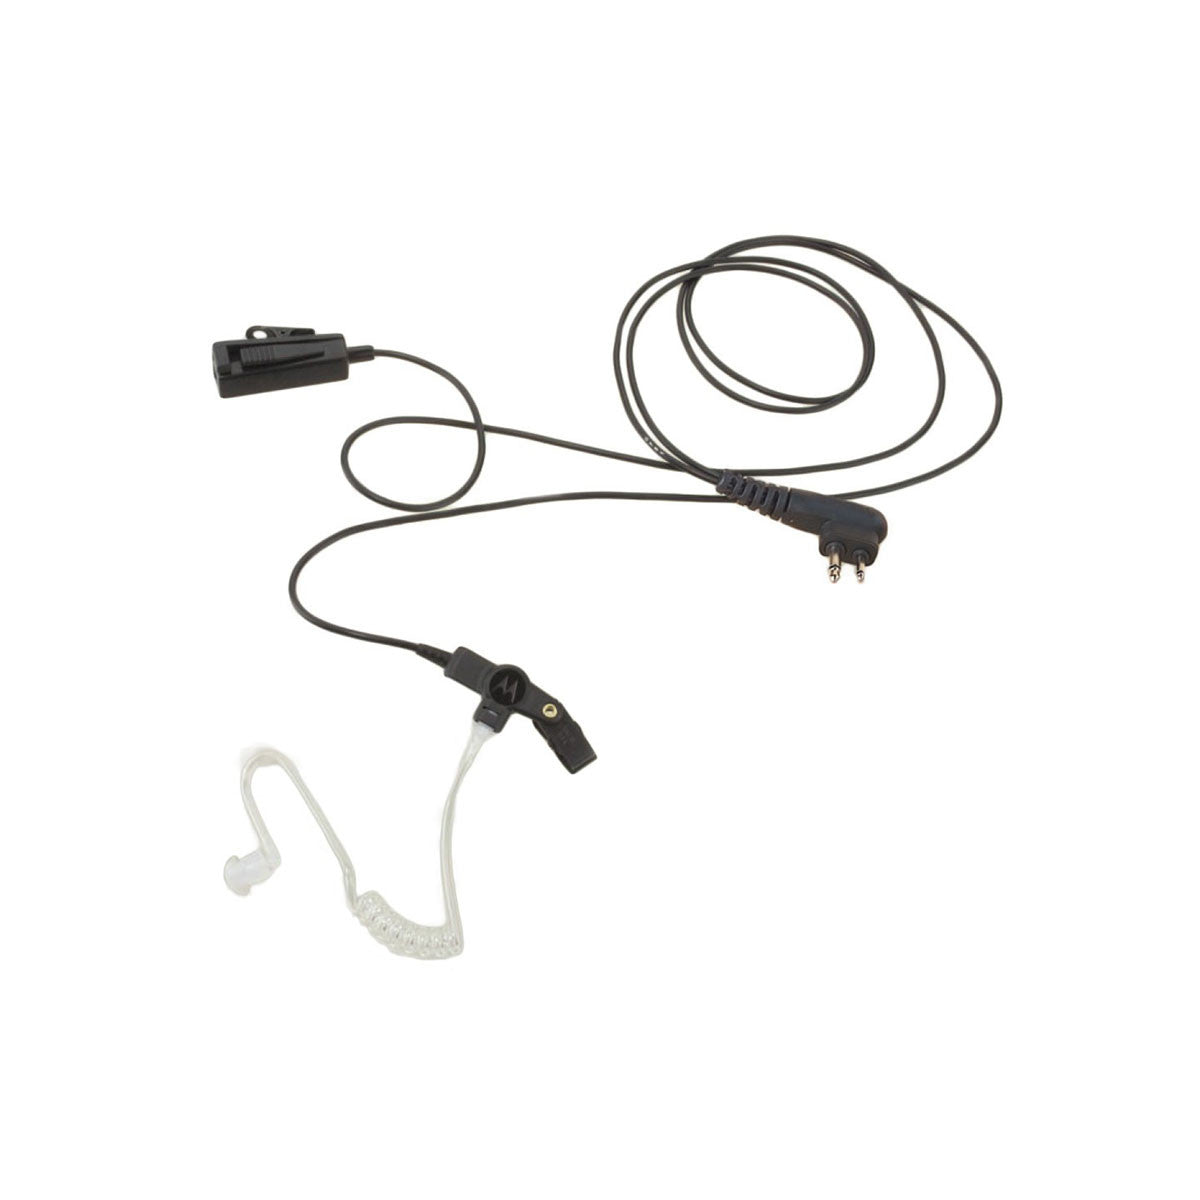 Motorola CP476 - Surveillance Kit with 2-wire Acoustic Tube Black